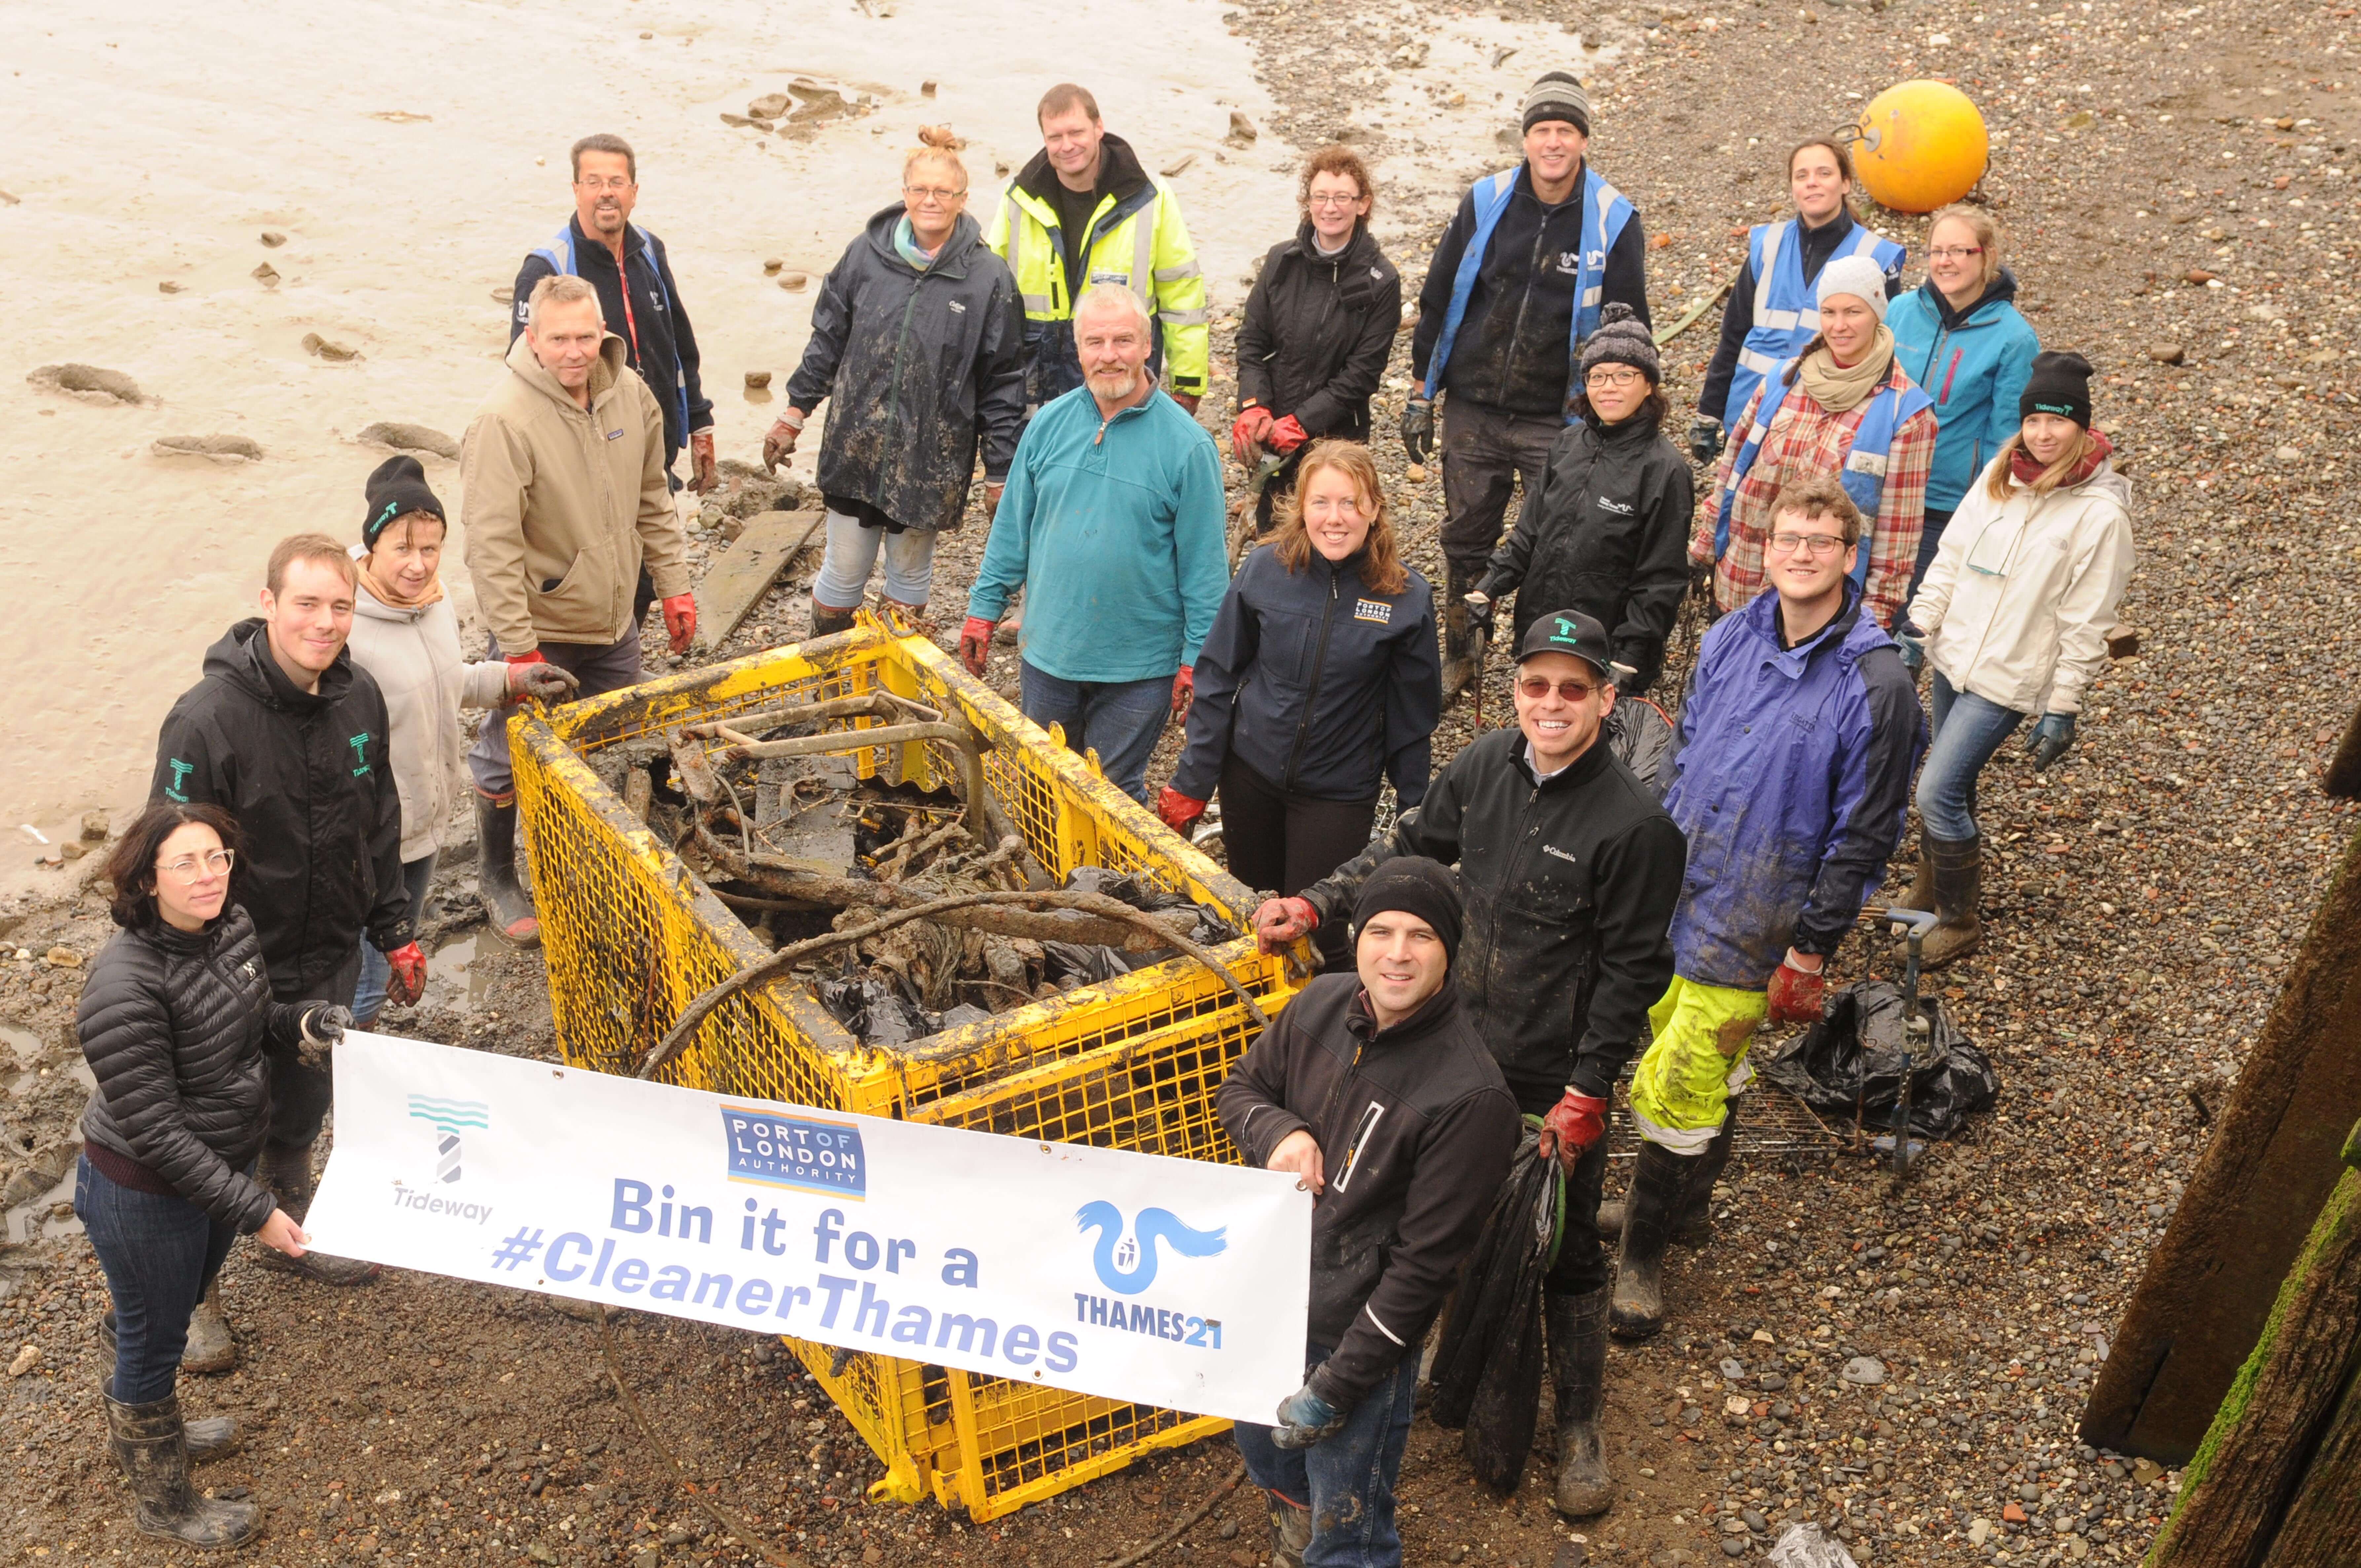 Cleaner Thames partners take on Thames clean up at Woolwich Arsenal